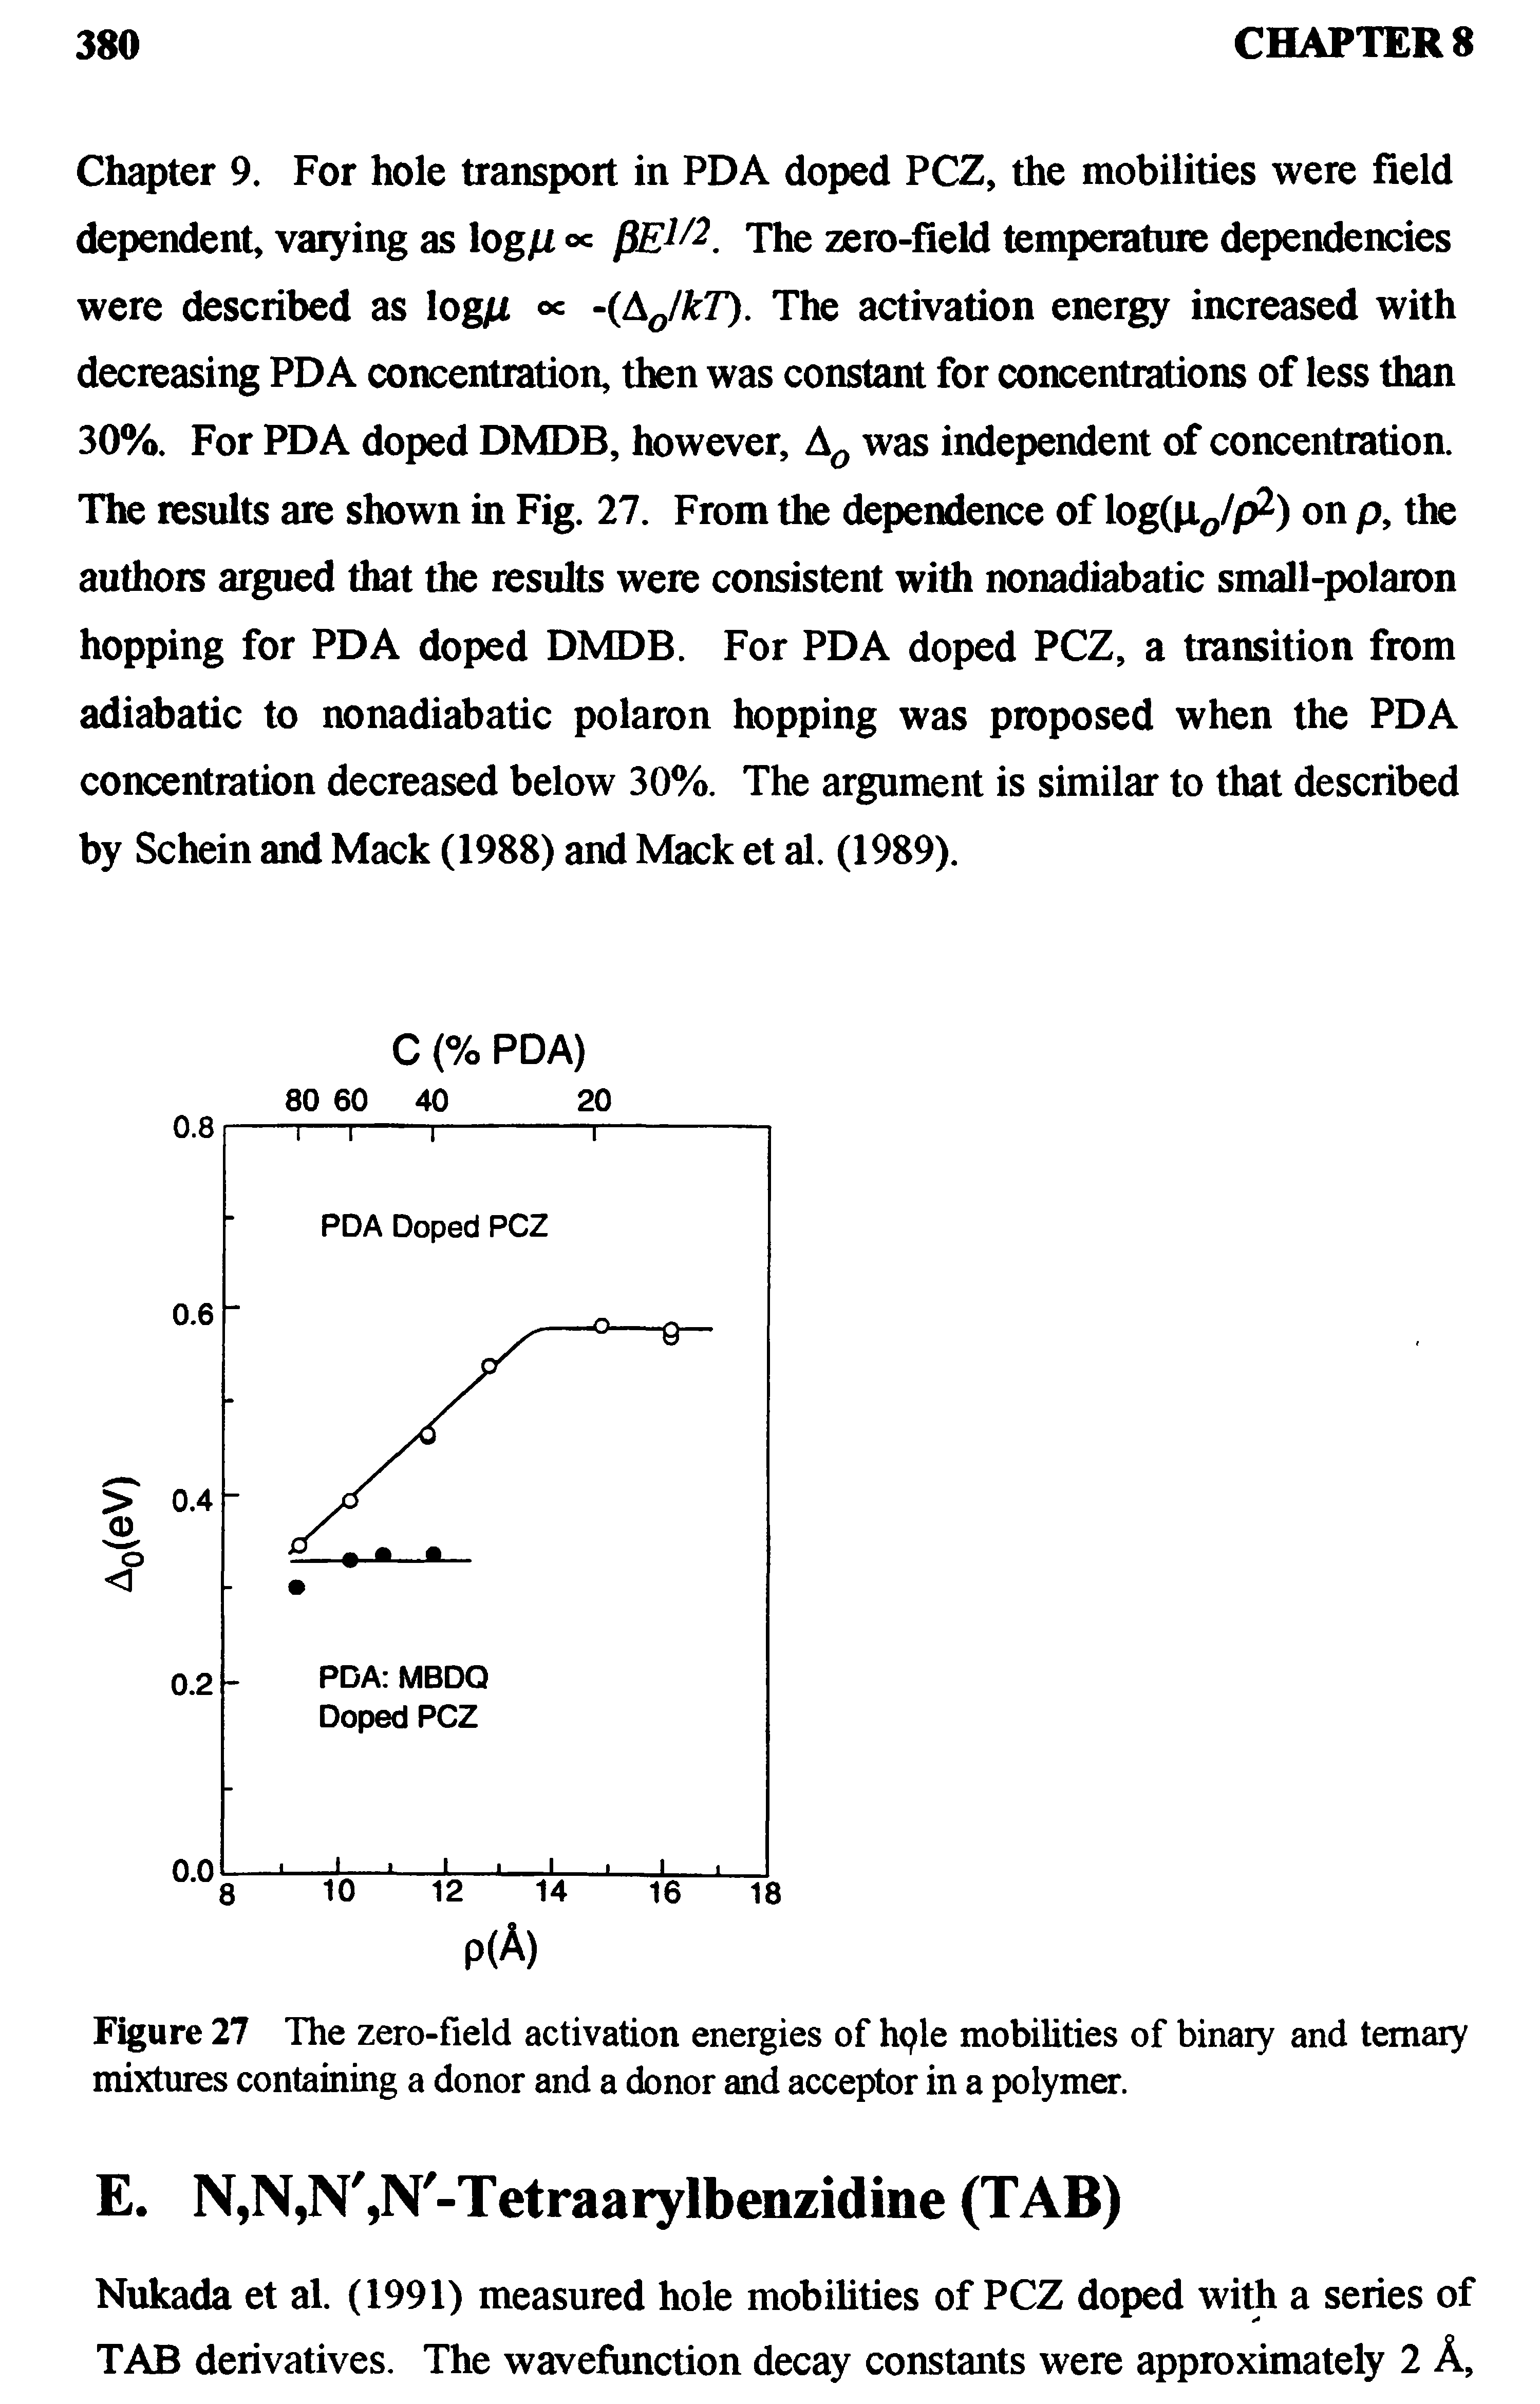 Figure 27 The zero-field activation energies of hqle mobilities of binary and ternary mixtures containing a donor and a donor and acceptor in a polymer.